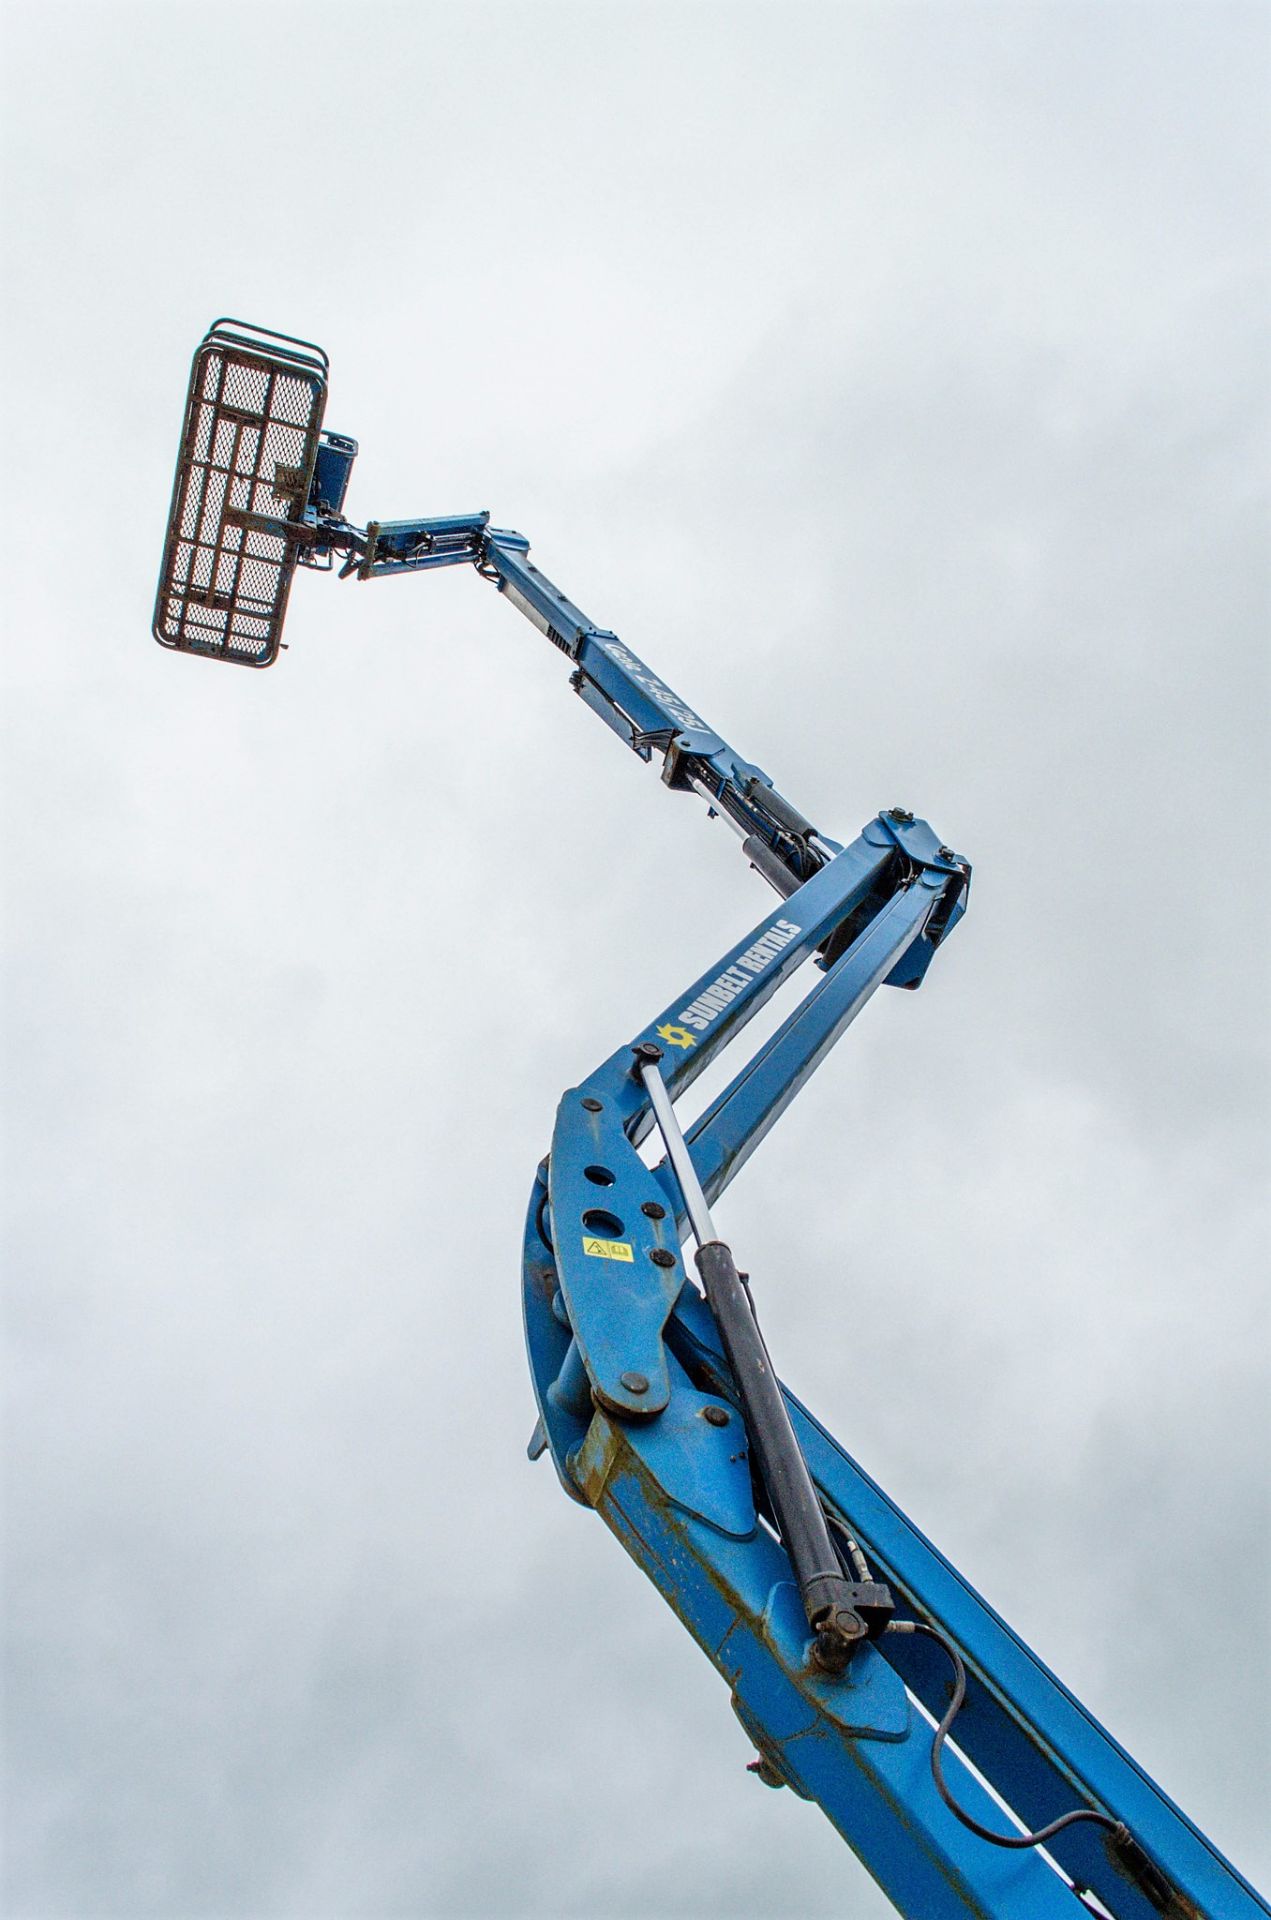 Genie Z-45/25 diesel driven articulated boom lift access platform Year: 2012 S/N: Z452512B-2012 - Image 10 of 16